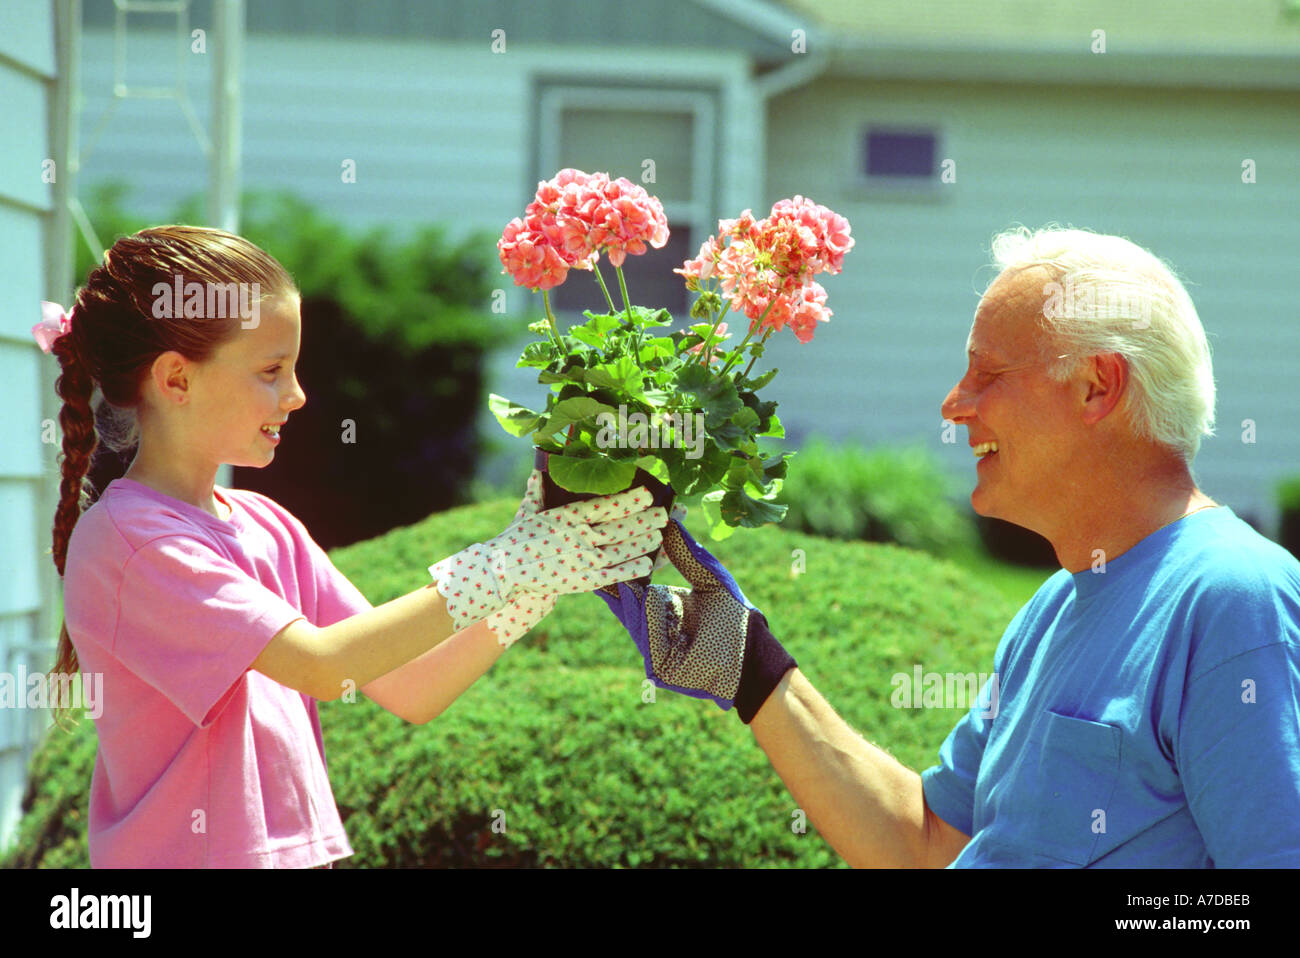 Grandfather planting flowers with granddaughter Stock Photo